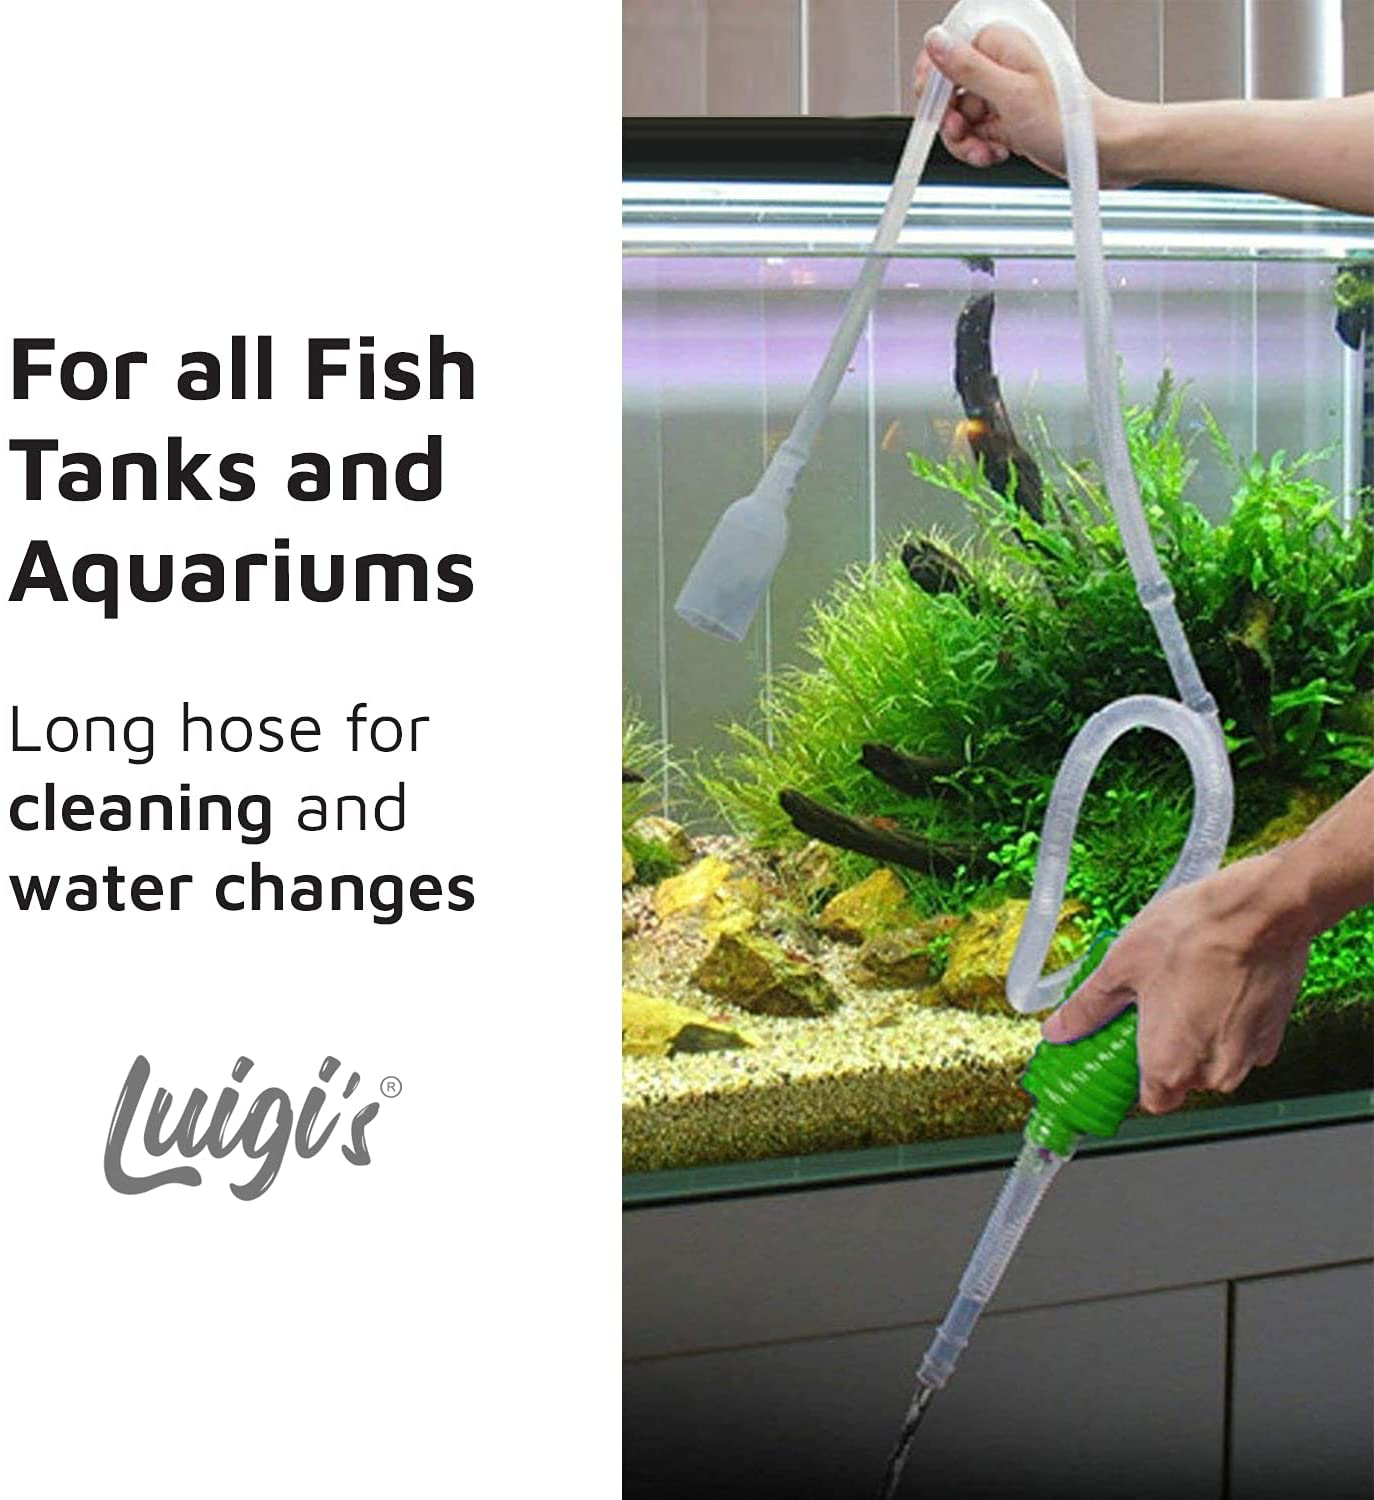 Luigi'S Aquarium/Fish Tank Siphon and Gravel Cleaner - a Hand Syphon Pump to Drain and Replace Your Water in Minutes!